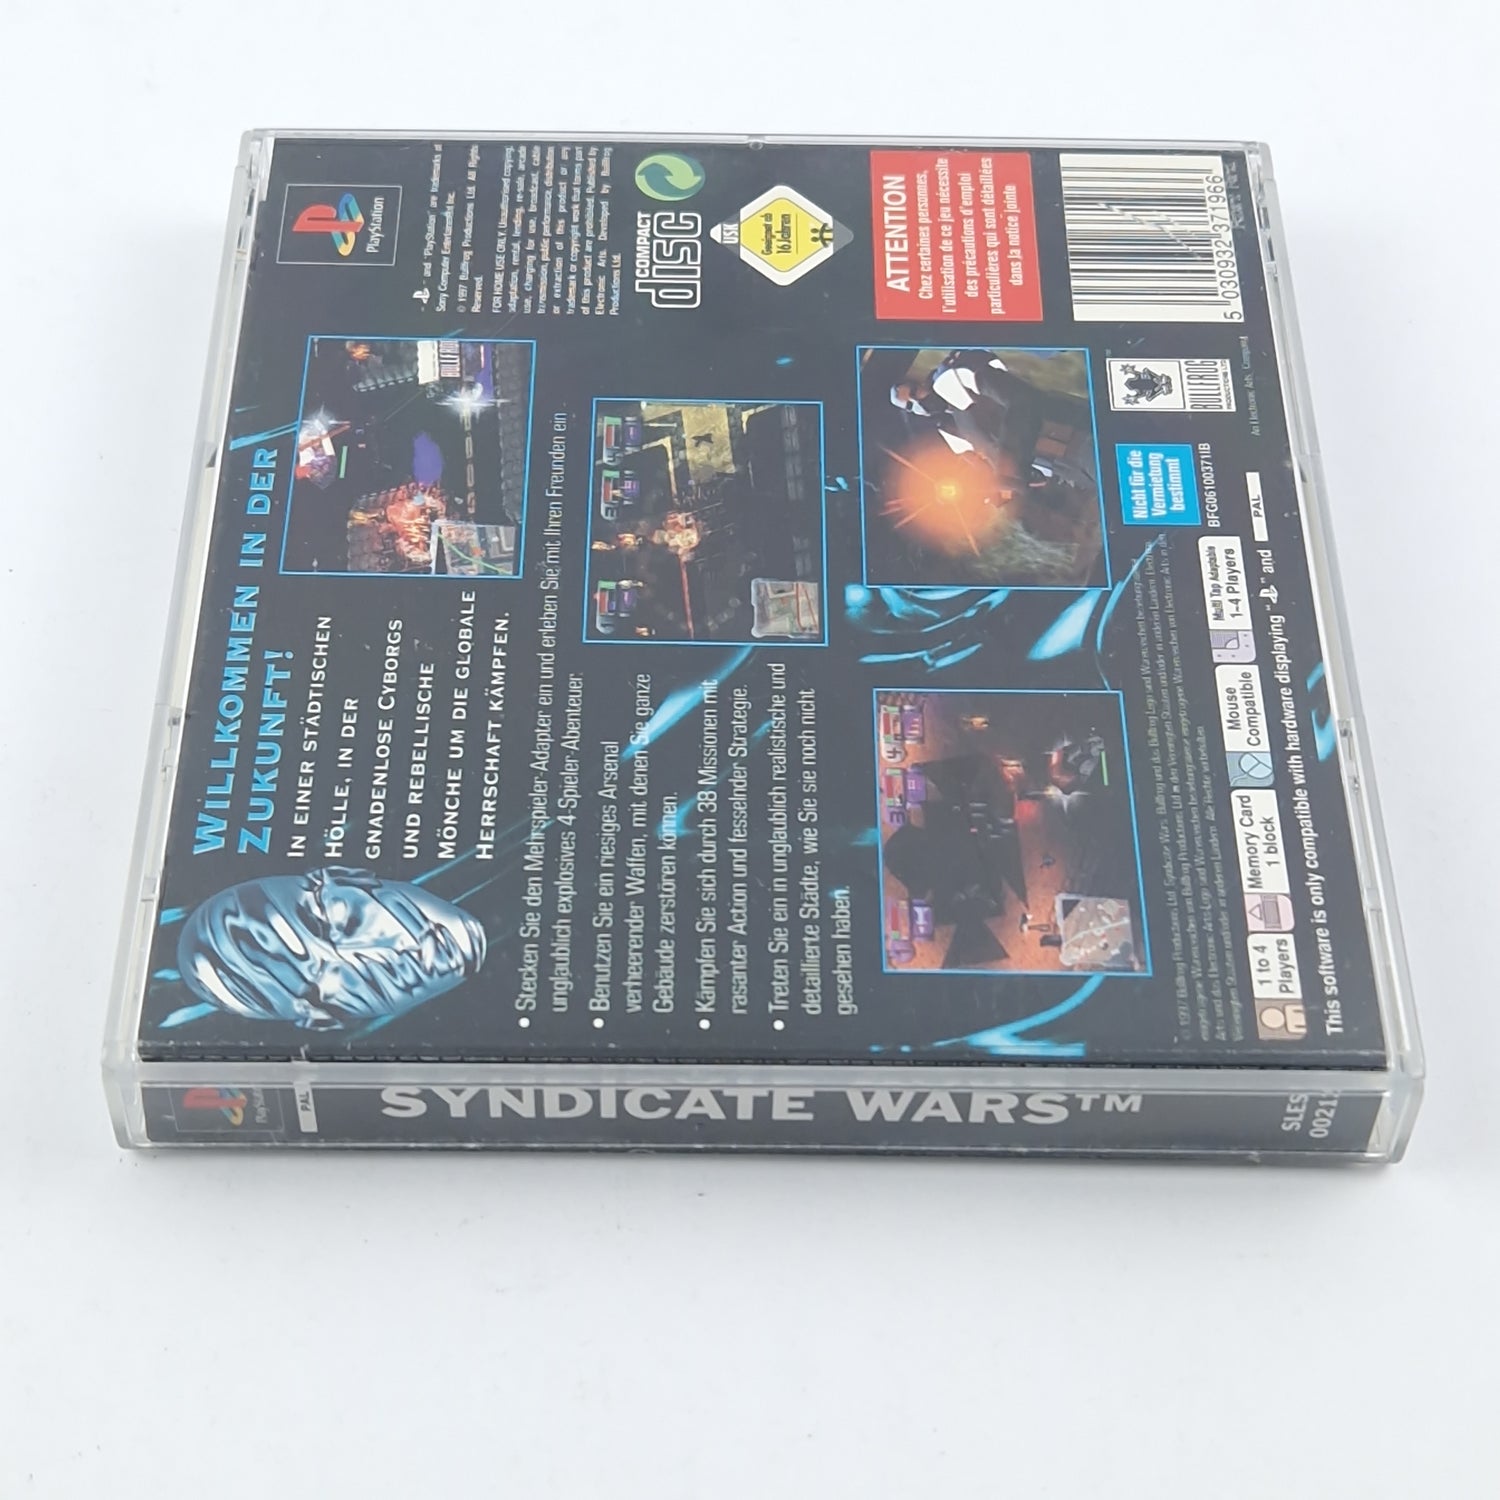 Playstation 1 Spiel : Syndicate Wars - Sony PS1 PSX / OVP Anleitung CD PAL